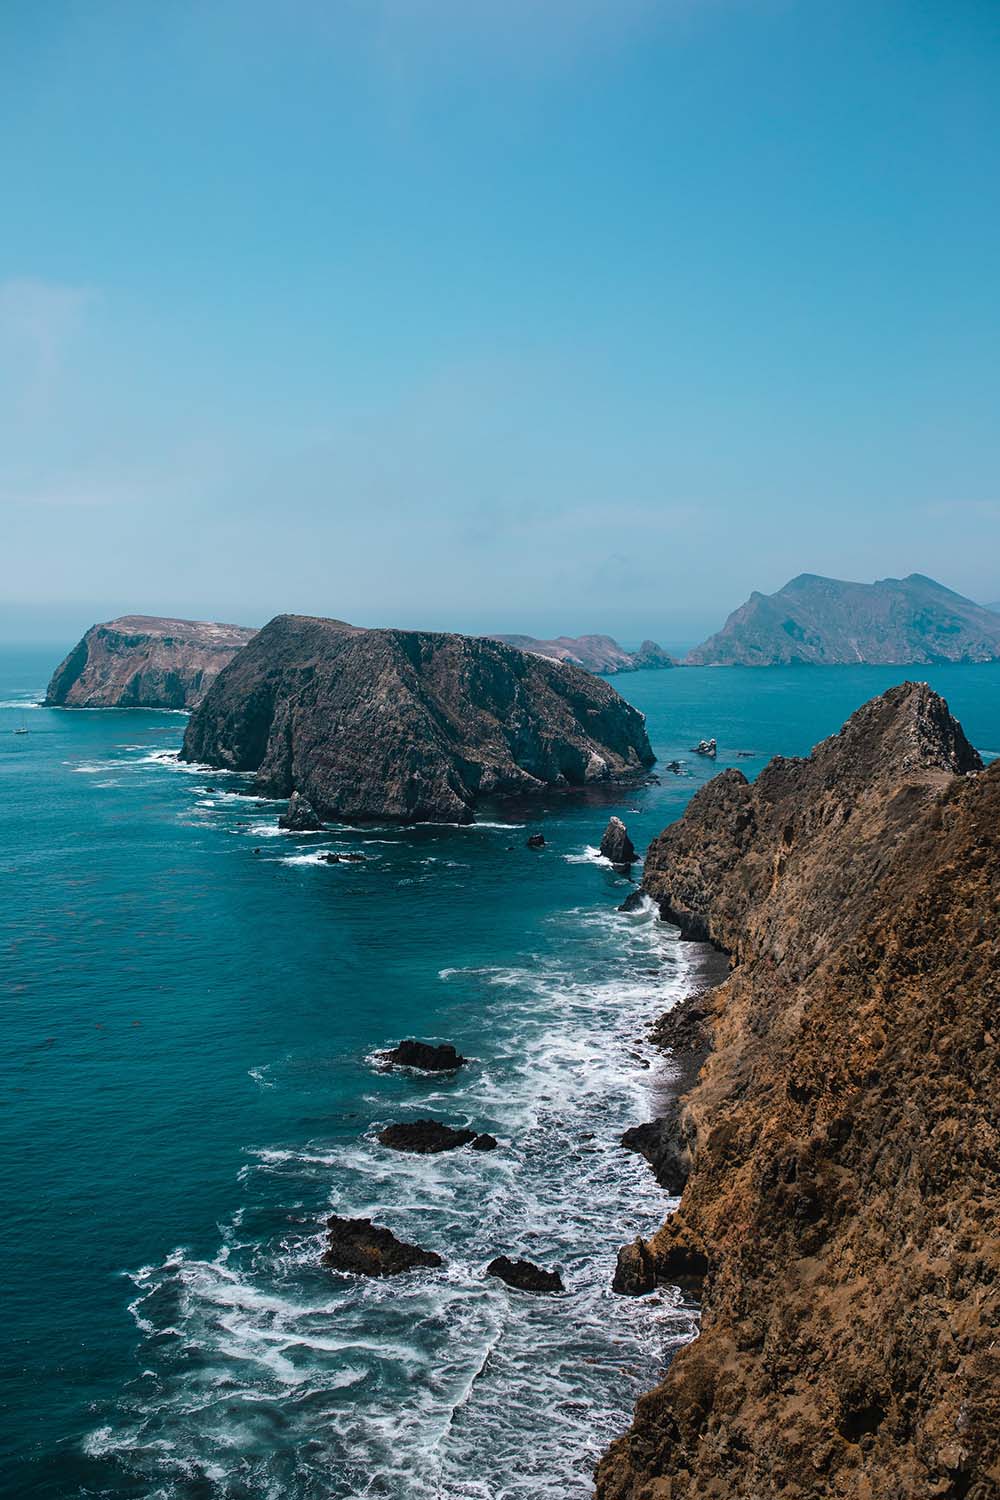 Inspiration Point. The best photography spots in Channel Islands National Park